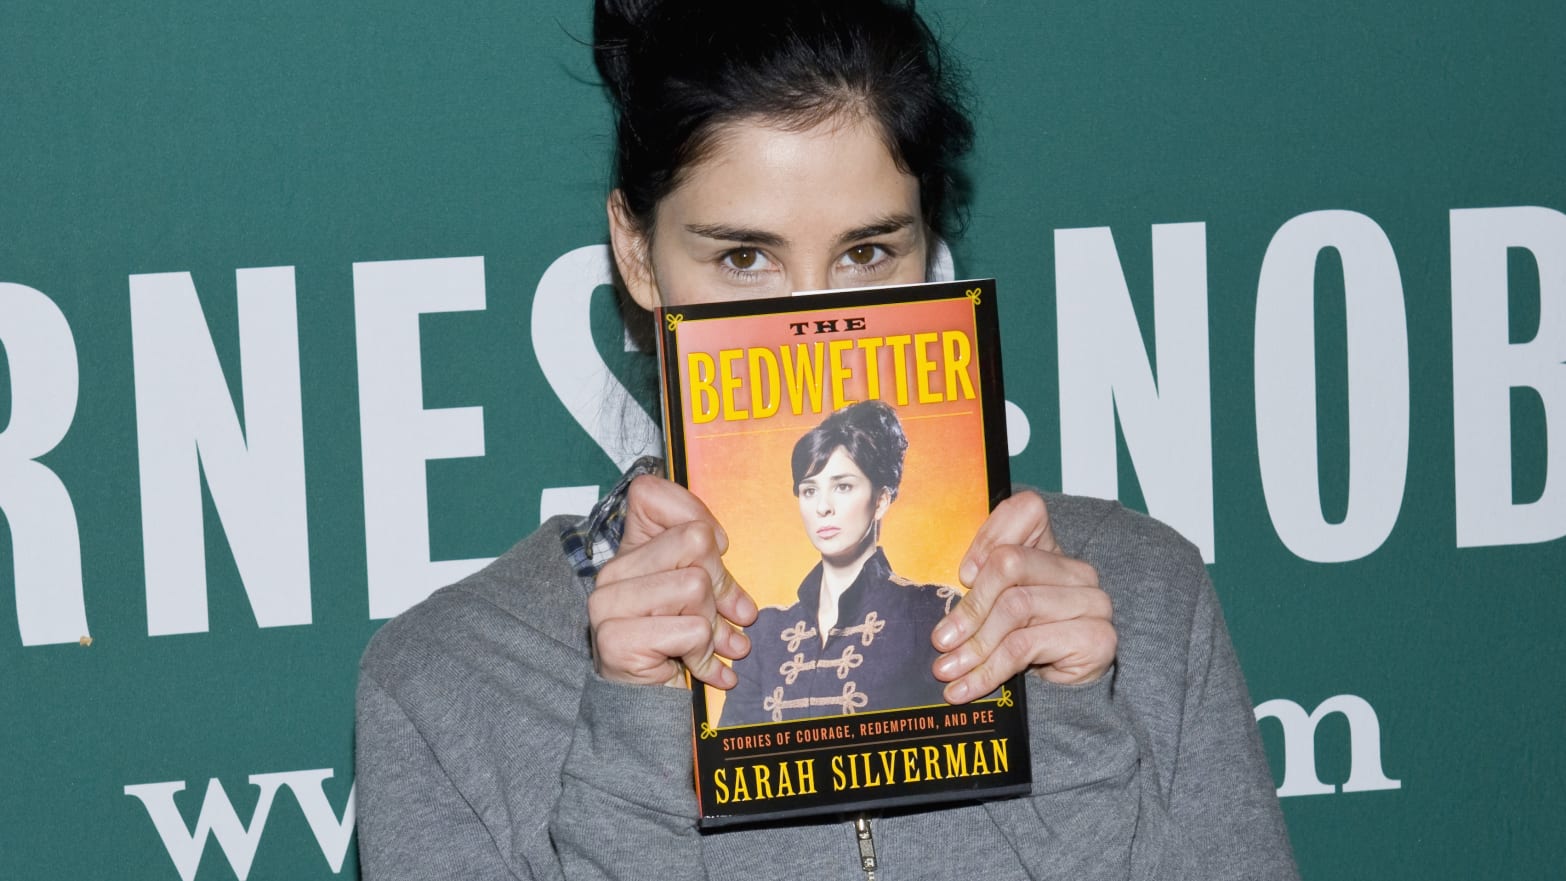 Sarah Silverman is suing OpenAI and Meta—the creators of AI language models ChatGPT and LLaMA, respectively—for stealing information from her book The Bedwetter.